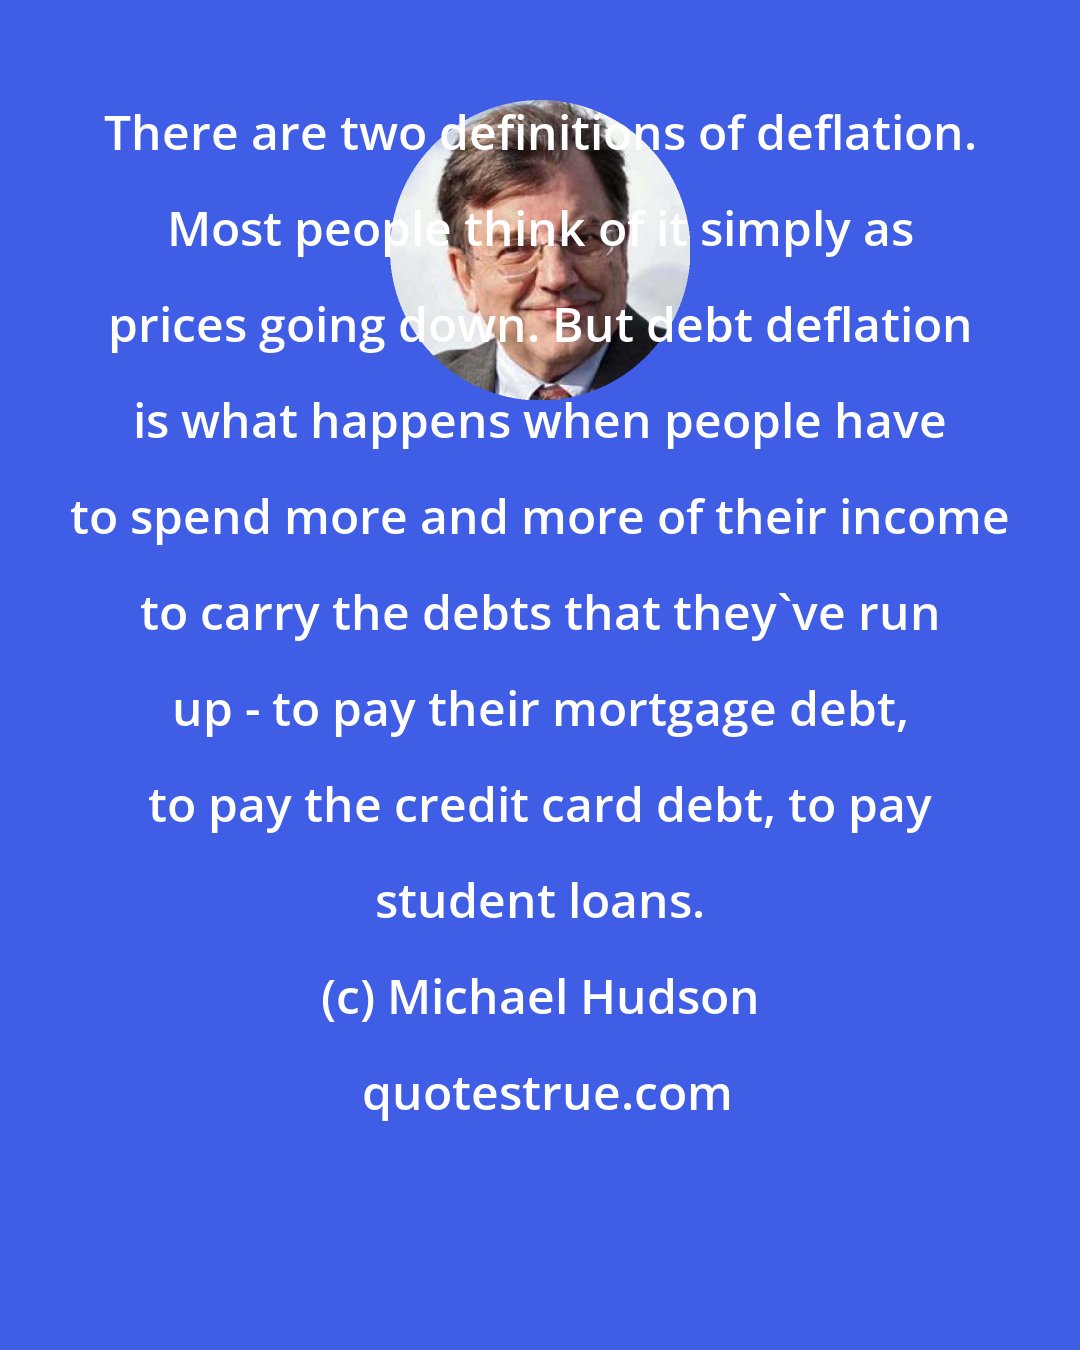 Michael Hudson: There are two definitions of deflation. Most people think of it simply as prices going down. But debt deflation is what happens when people have to spend more and more of their income to carry the debts that they've run up - to pay their mortgage debt, to pay the credit card debt, to pay student loans.